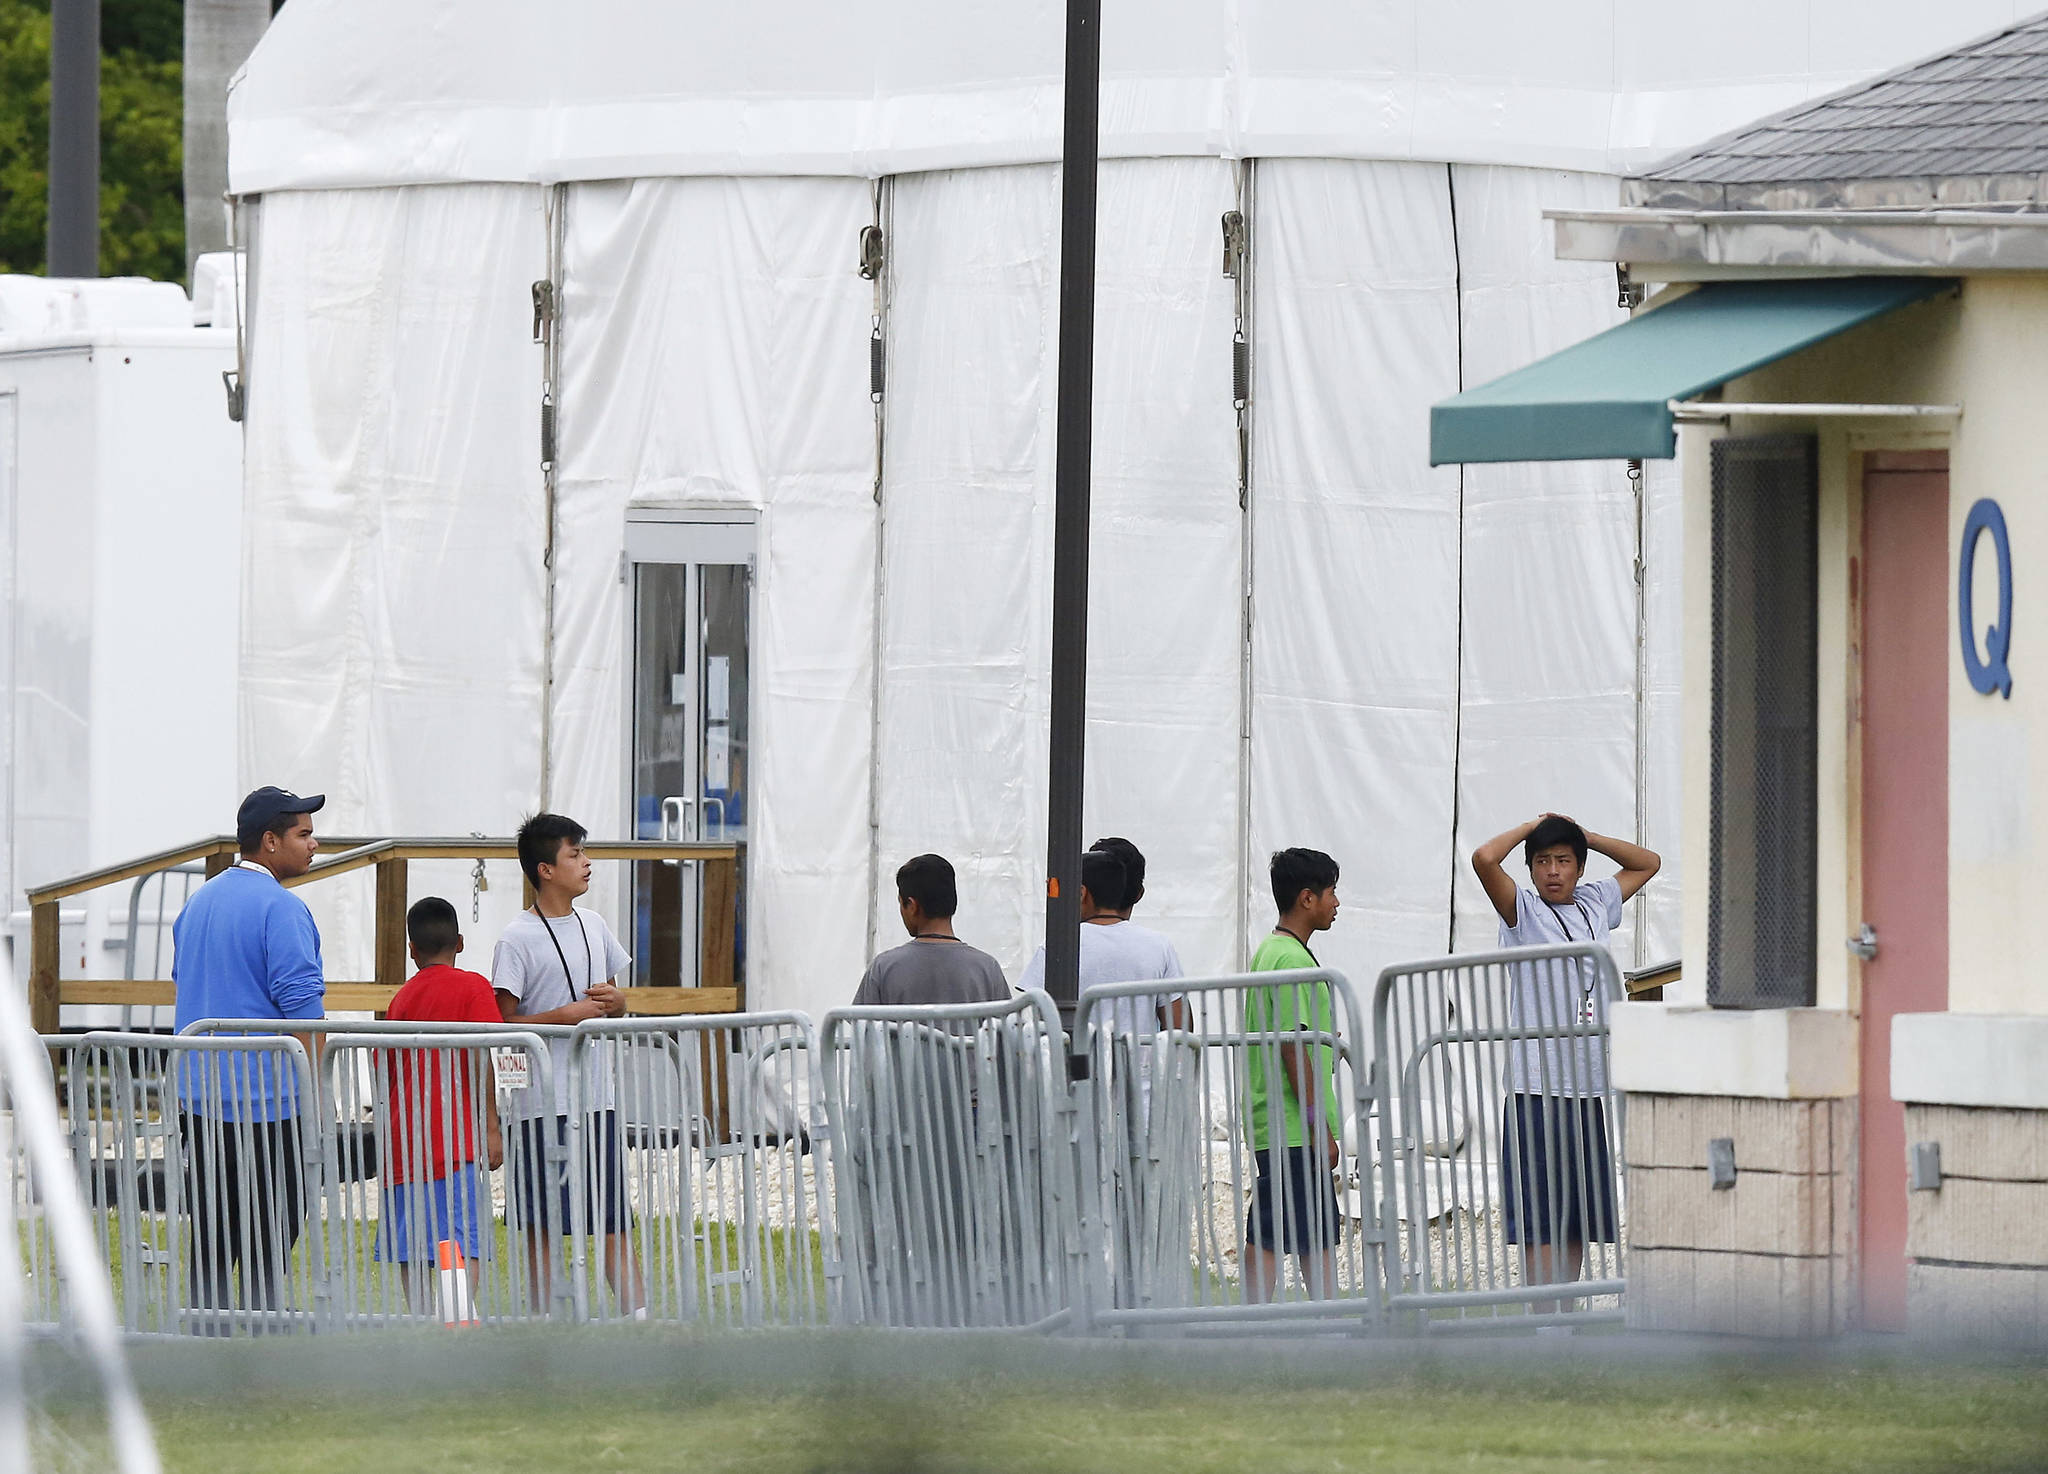 Immigrant children walk in a line outside the Homestead Temporary Shelter for Unaccompanied Children, a former Job Corps site that now houses them, on Wednesday, June 20, 2018, in Homestead, Florida. U.S. Rep. Carlos Curbelo said he found it “troubling” to see two of his Democratic colleagues turned away from the Miami-area detention center for migrant children. (Brynn Anderson | The Associated Press)